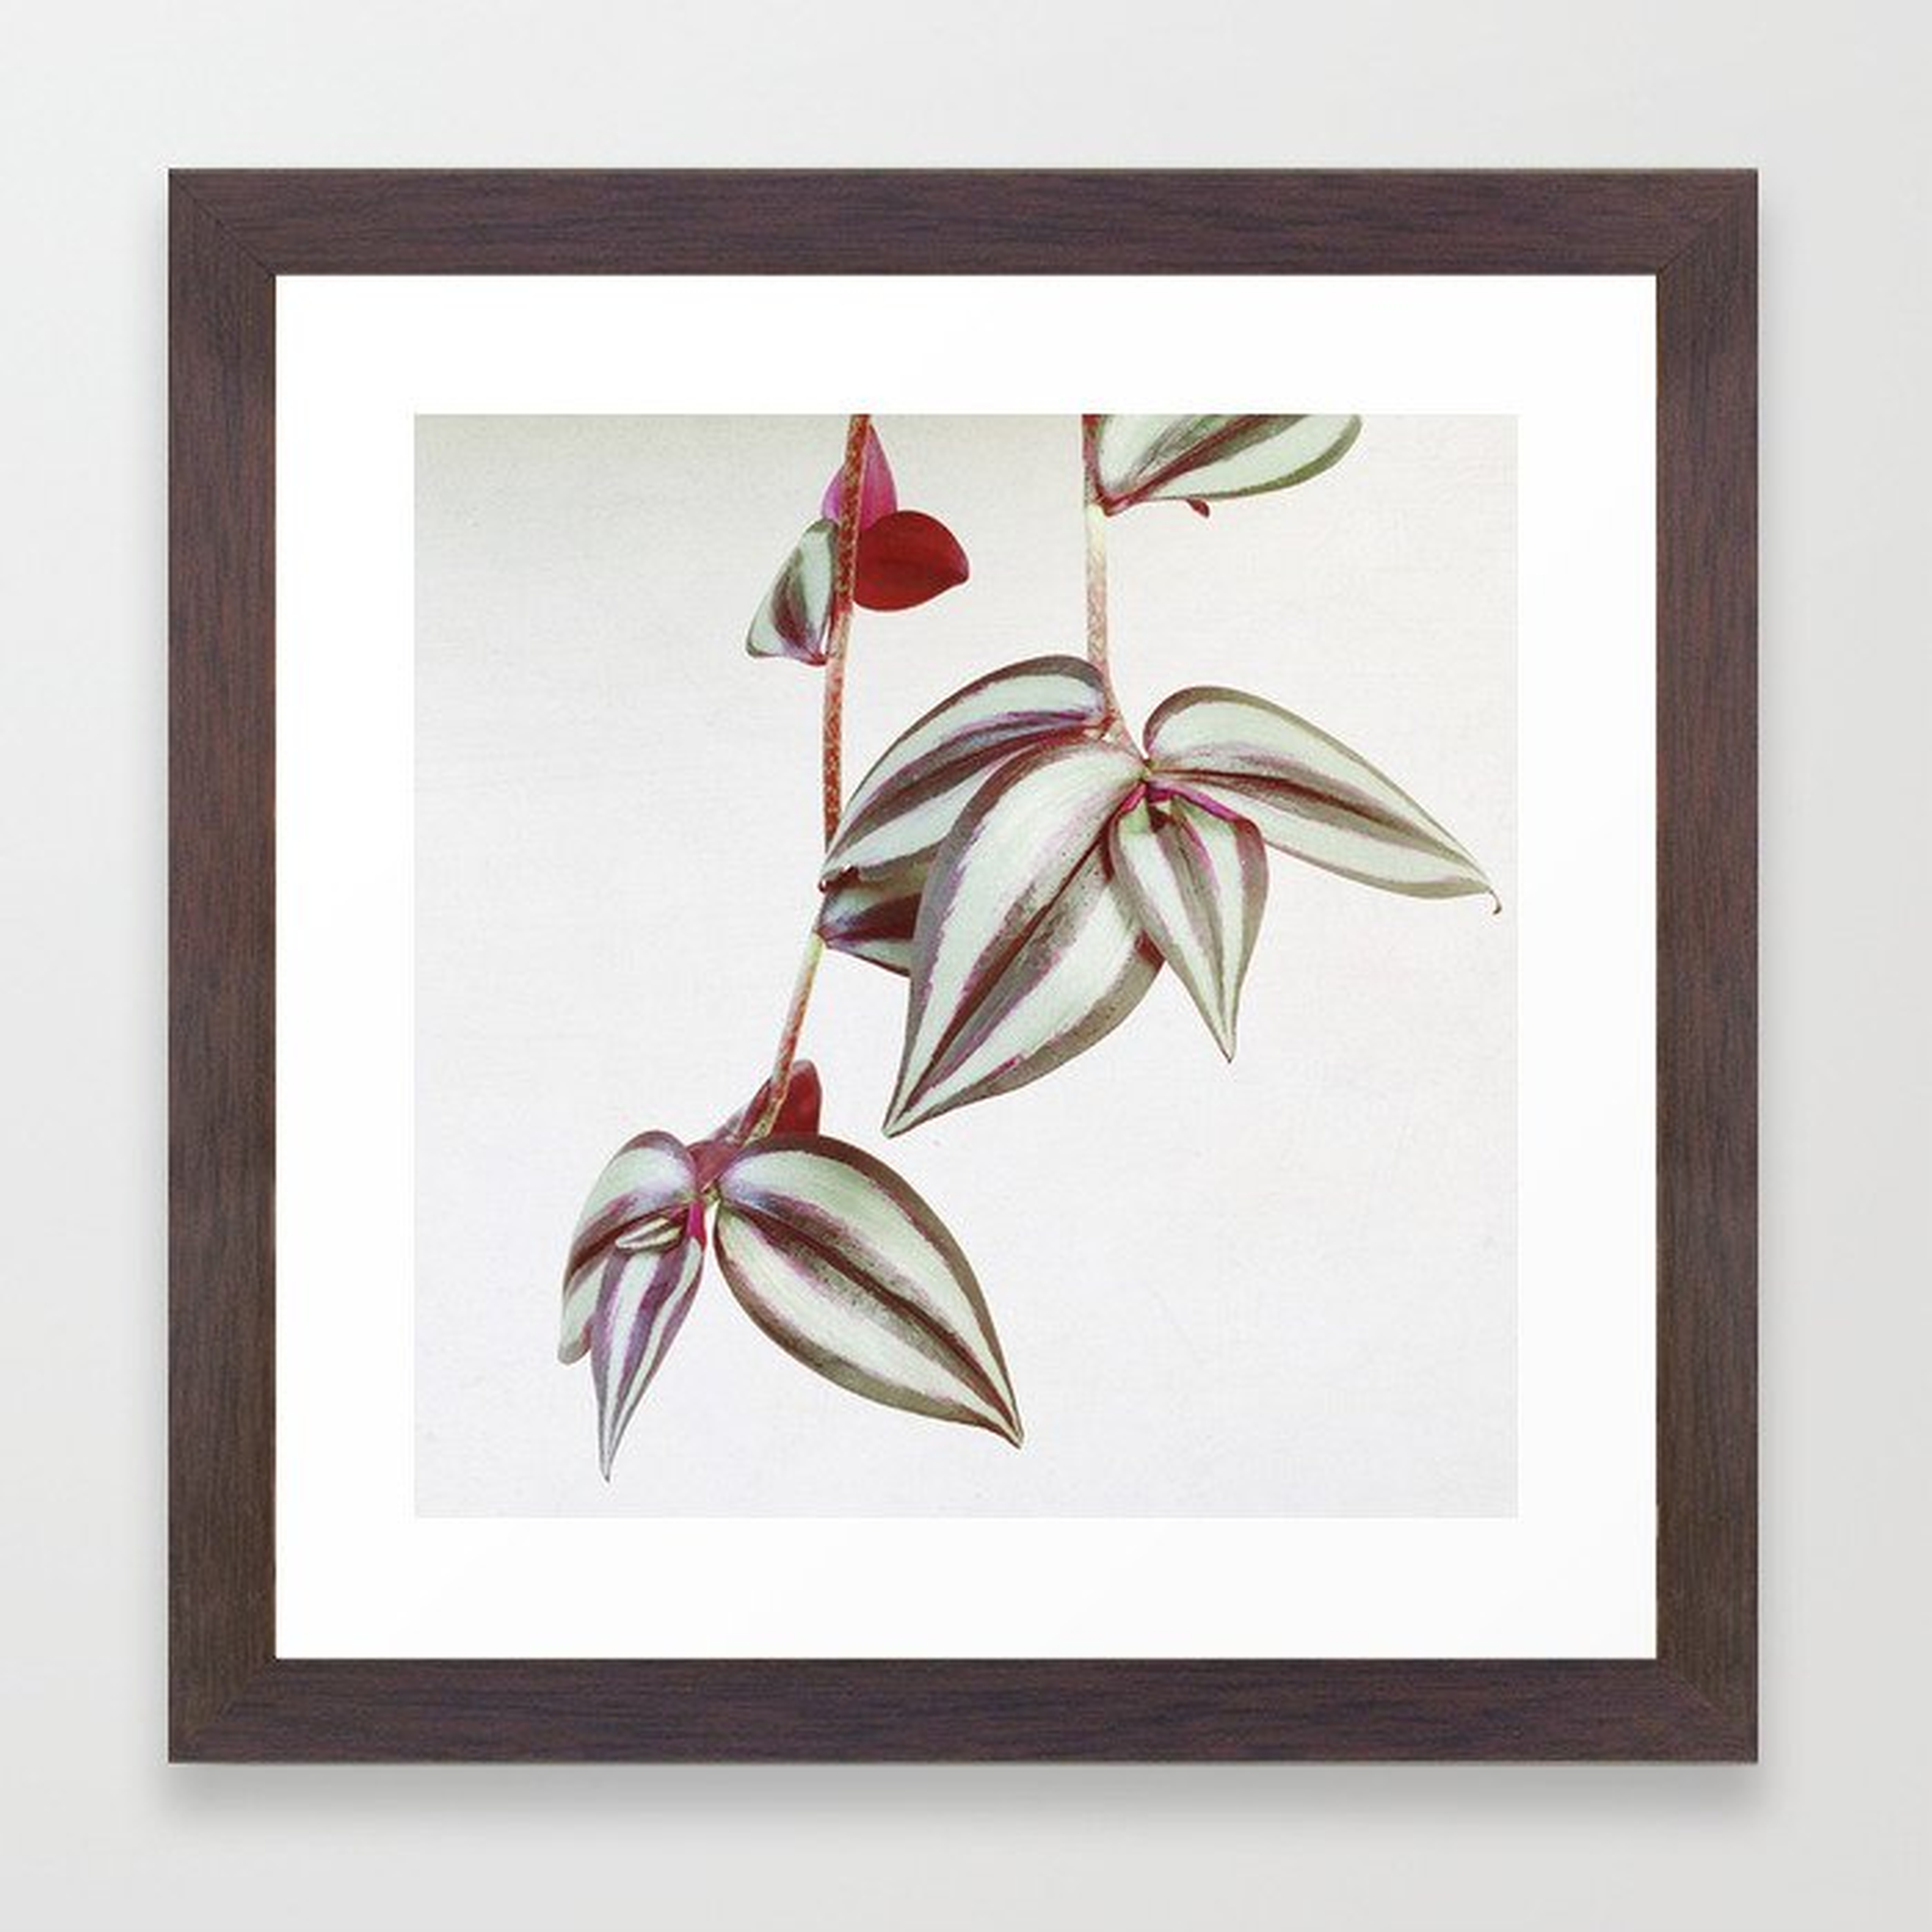 Trailing Leaves Framed Art Print by Cassia Beck - Conservation Walnut - X-Small 10" x 10"-12x12 - Society6